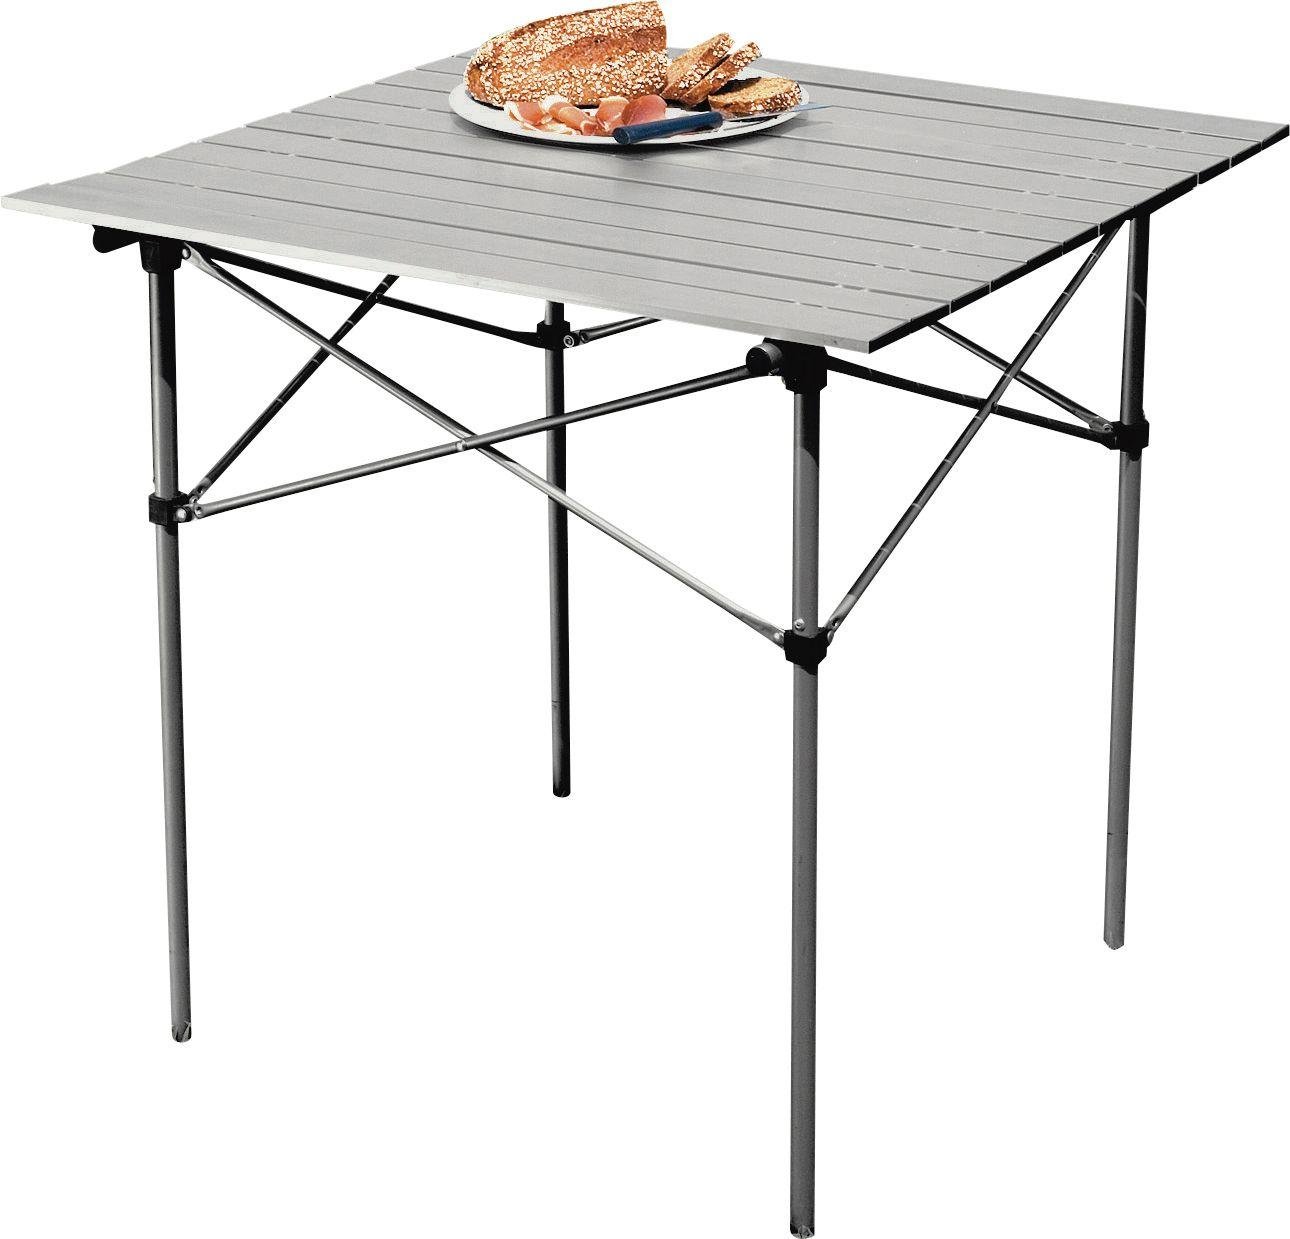 aluminium folding camping table with slatted top927/8211 FUMVQFU